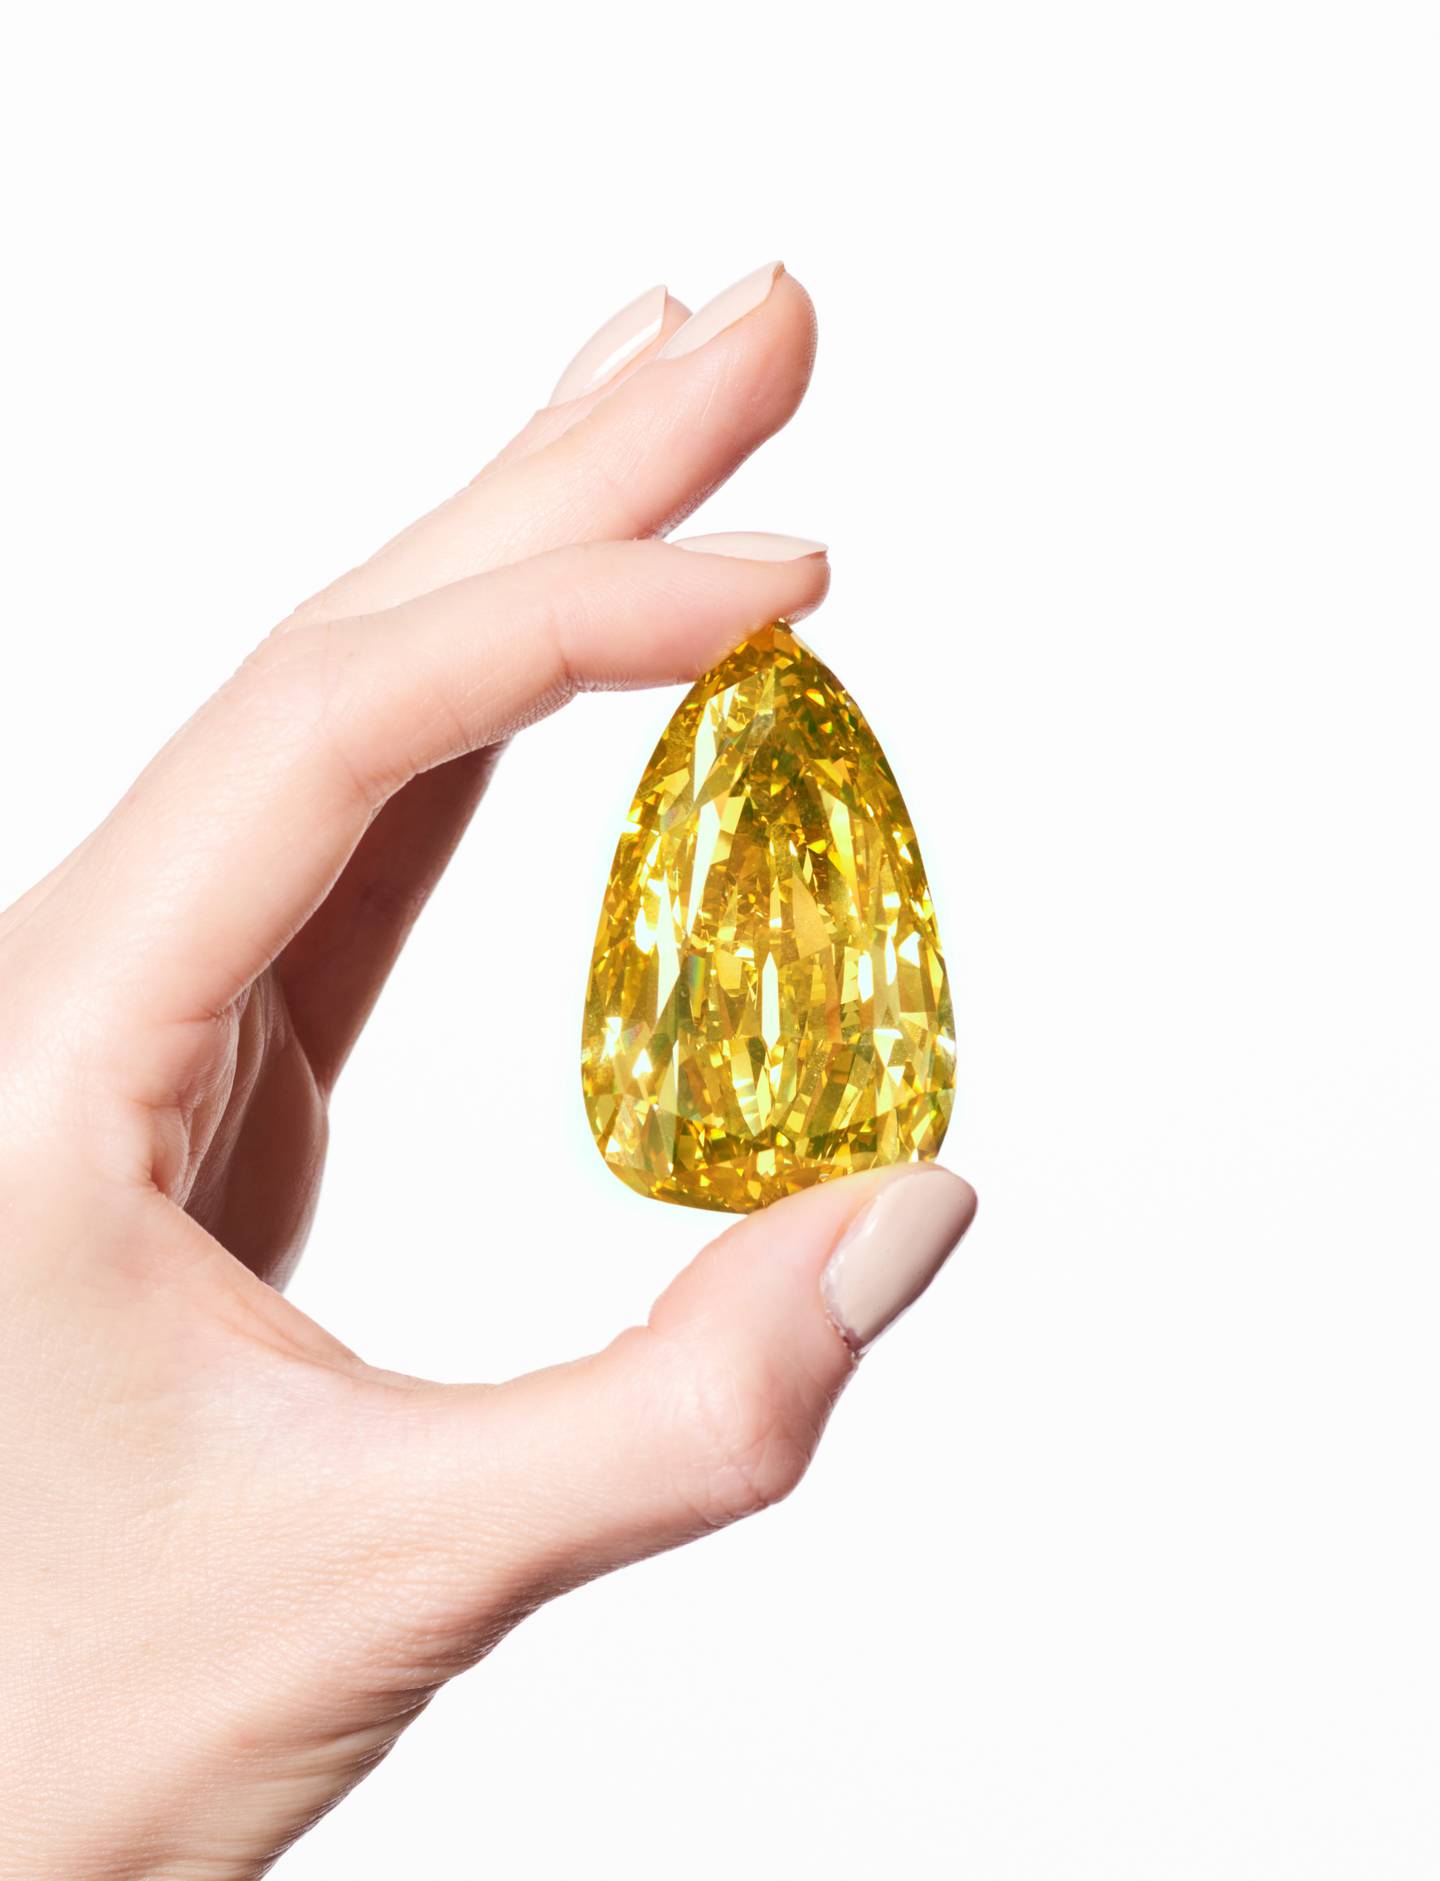 On display in Dubai, the Golden Canary is the largest flawless diamond in the world. Photo: Sotheby's